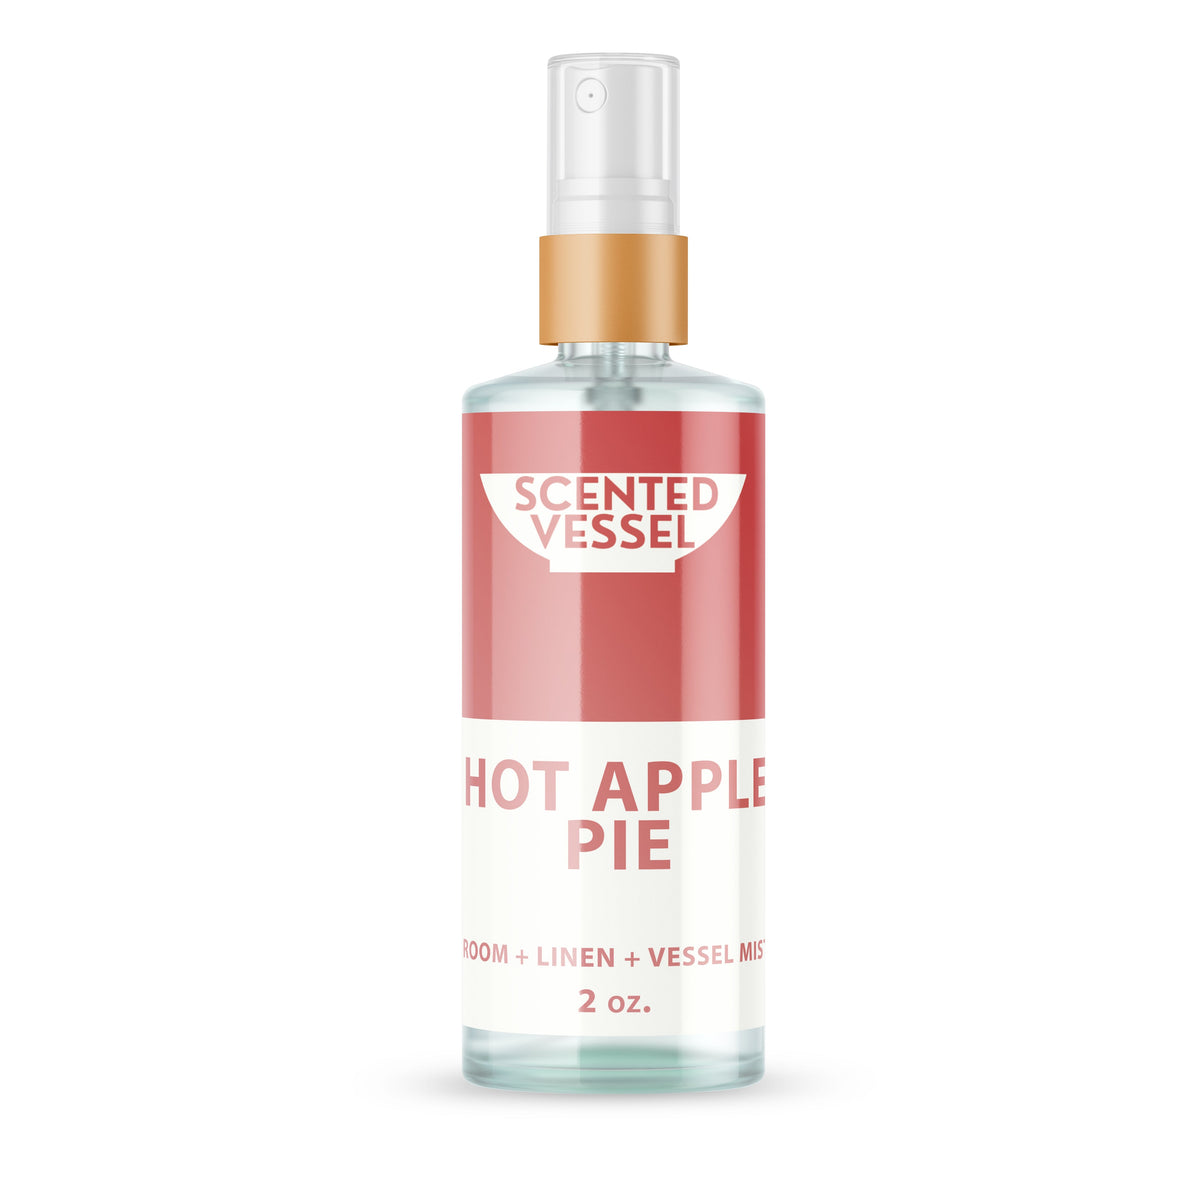 Hot Apple Pie 2oz Fragrance Mist by Scented Vessel